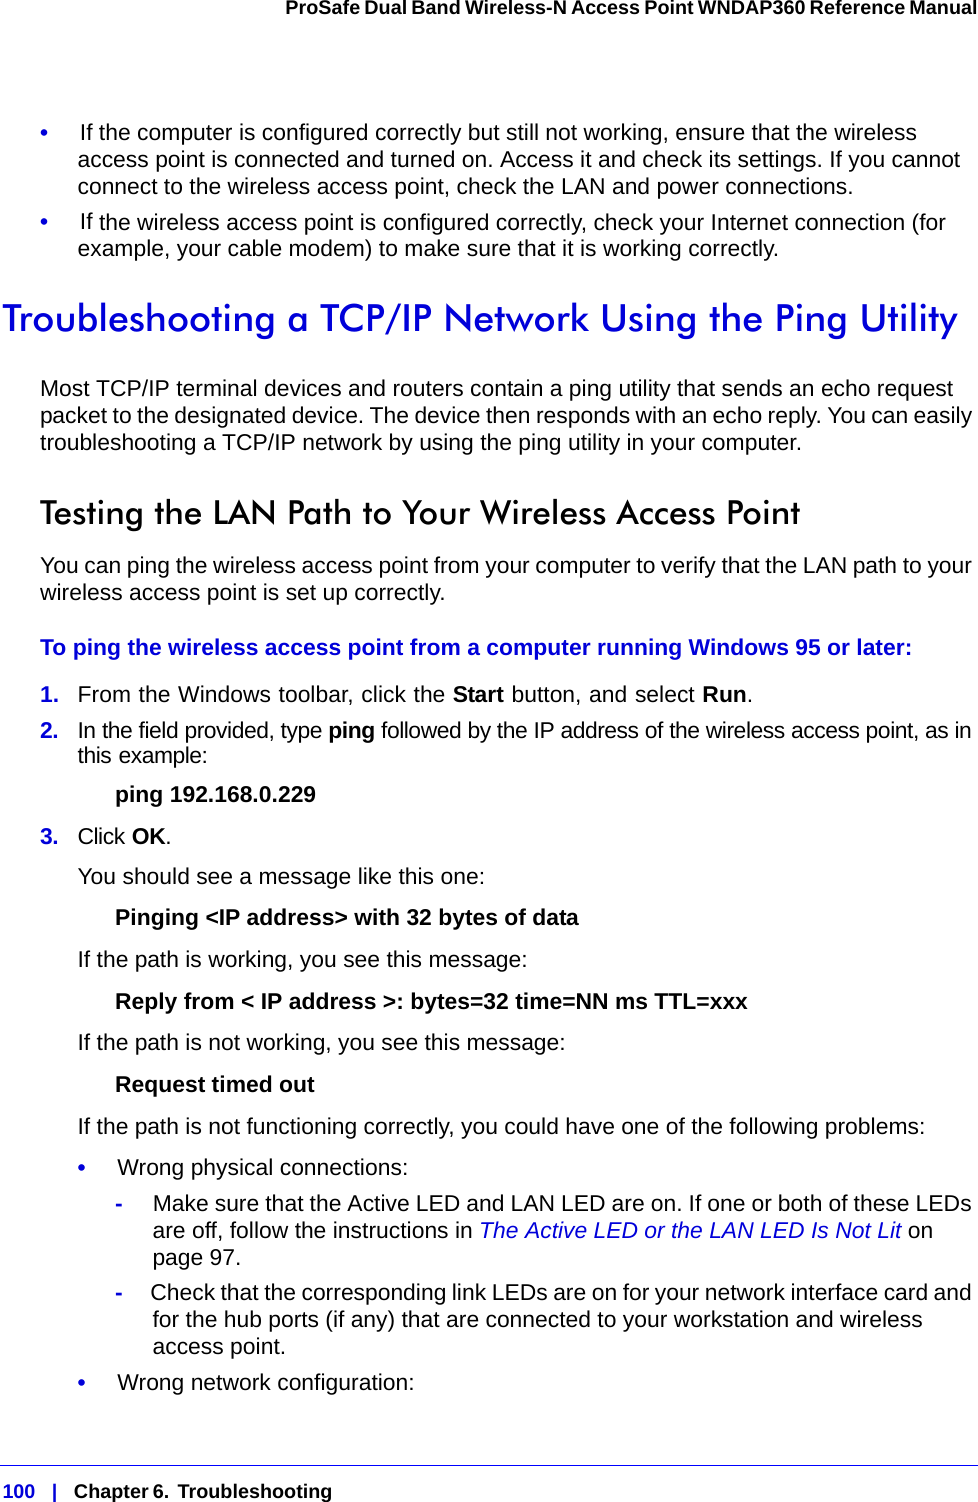 100   |   Chapter 6.  Troubleshooting  ProSafe Dual Band Wireless-N Access Point WNDAP360 Reference Manual •     If the computer is configured correctly but still not working, ensure that the wireless access point is connected and turned on. Access it and check its settings. If you cannot connect to the wireless access point, check the LAN and power connections.•     If the wireless access point is configured correctly, check your Internet connection (for example, your cable modem) to make sure that it is working correctly.Troubleshooting a TCP/IP Network Using the Ping UtilityMost TCP/IP terminal devices and routers contain a ping utility that sends an echo request packet to the designated device. The device then responds with an echo reply. You can easily troubleshooting a TCP/IP network by using the ping utility in your computer.Testing the LAN Path to Your Wireless Access PointYou can ping the wireless access point from your computer to verify that the LAN path to your wireless access point is set up correctly.To ping the wireless access point from a computer running Windows 95 or later:1.  From the Windows toolbar, click the Start button, and select Run.2.  In the field provided, type ping followed by the IP address of the wireless access point, as in this example: ping 192.168.0.2293.  Click OK.You should see a message like this one:Pinging &lt;IP address&gt; with 32 bytes of dataIf the path is working, you see this message:Reply from &lt; IP address &gt;: bytes=32 time=NN ms TTL=xxxIf the path is not working, you see this message:Request timed outIf the path is not functioning correctly, you could have one of the following problems:•     Wrong physical connections:-     Make sure that the Active LED and LAN LED are on. If one or both of these LEDs are off, follow the instructions in The Active LED or the LAN LED Is Not Lit on page 97.-     Check that the corresponding link LEDs are on for your network interface card and for the hub ports (if any) that are connected to your workstation and wireless access point.•     Wrong network configuration: